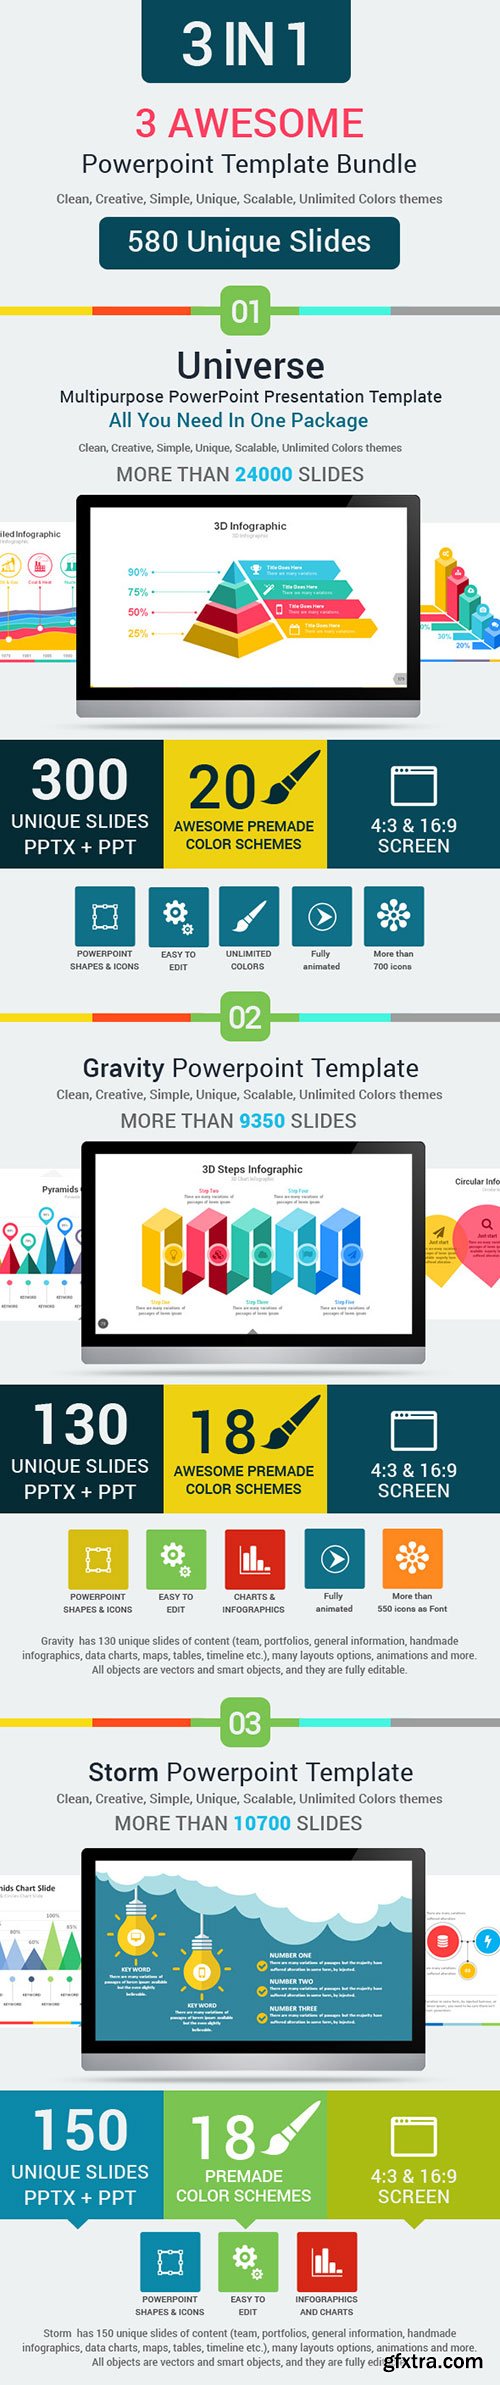 GraphicRiver - 3 Awesome Powerpoint Template Bundle 10102290